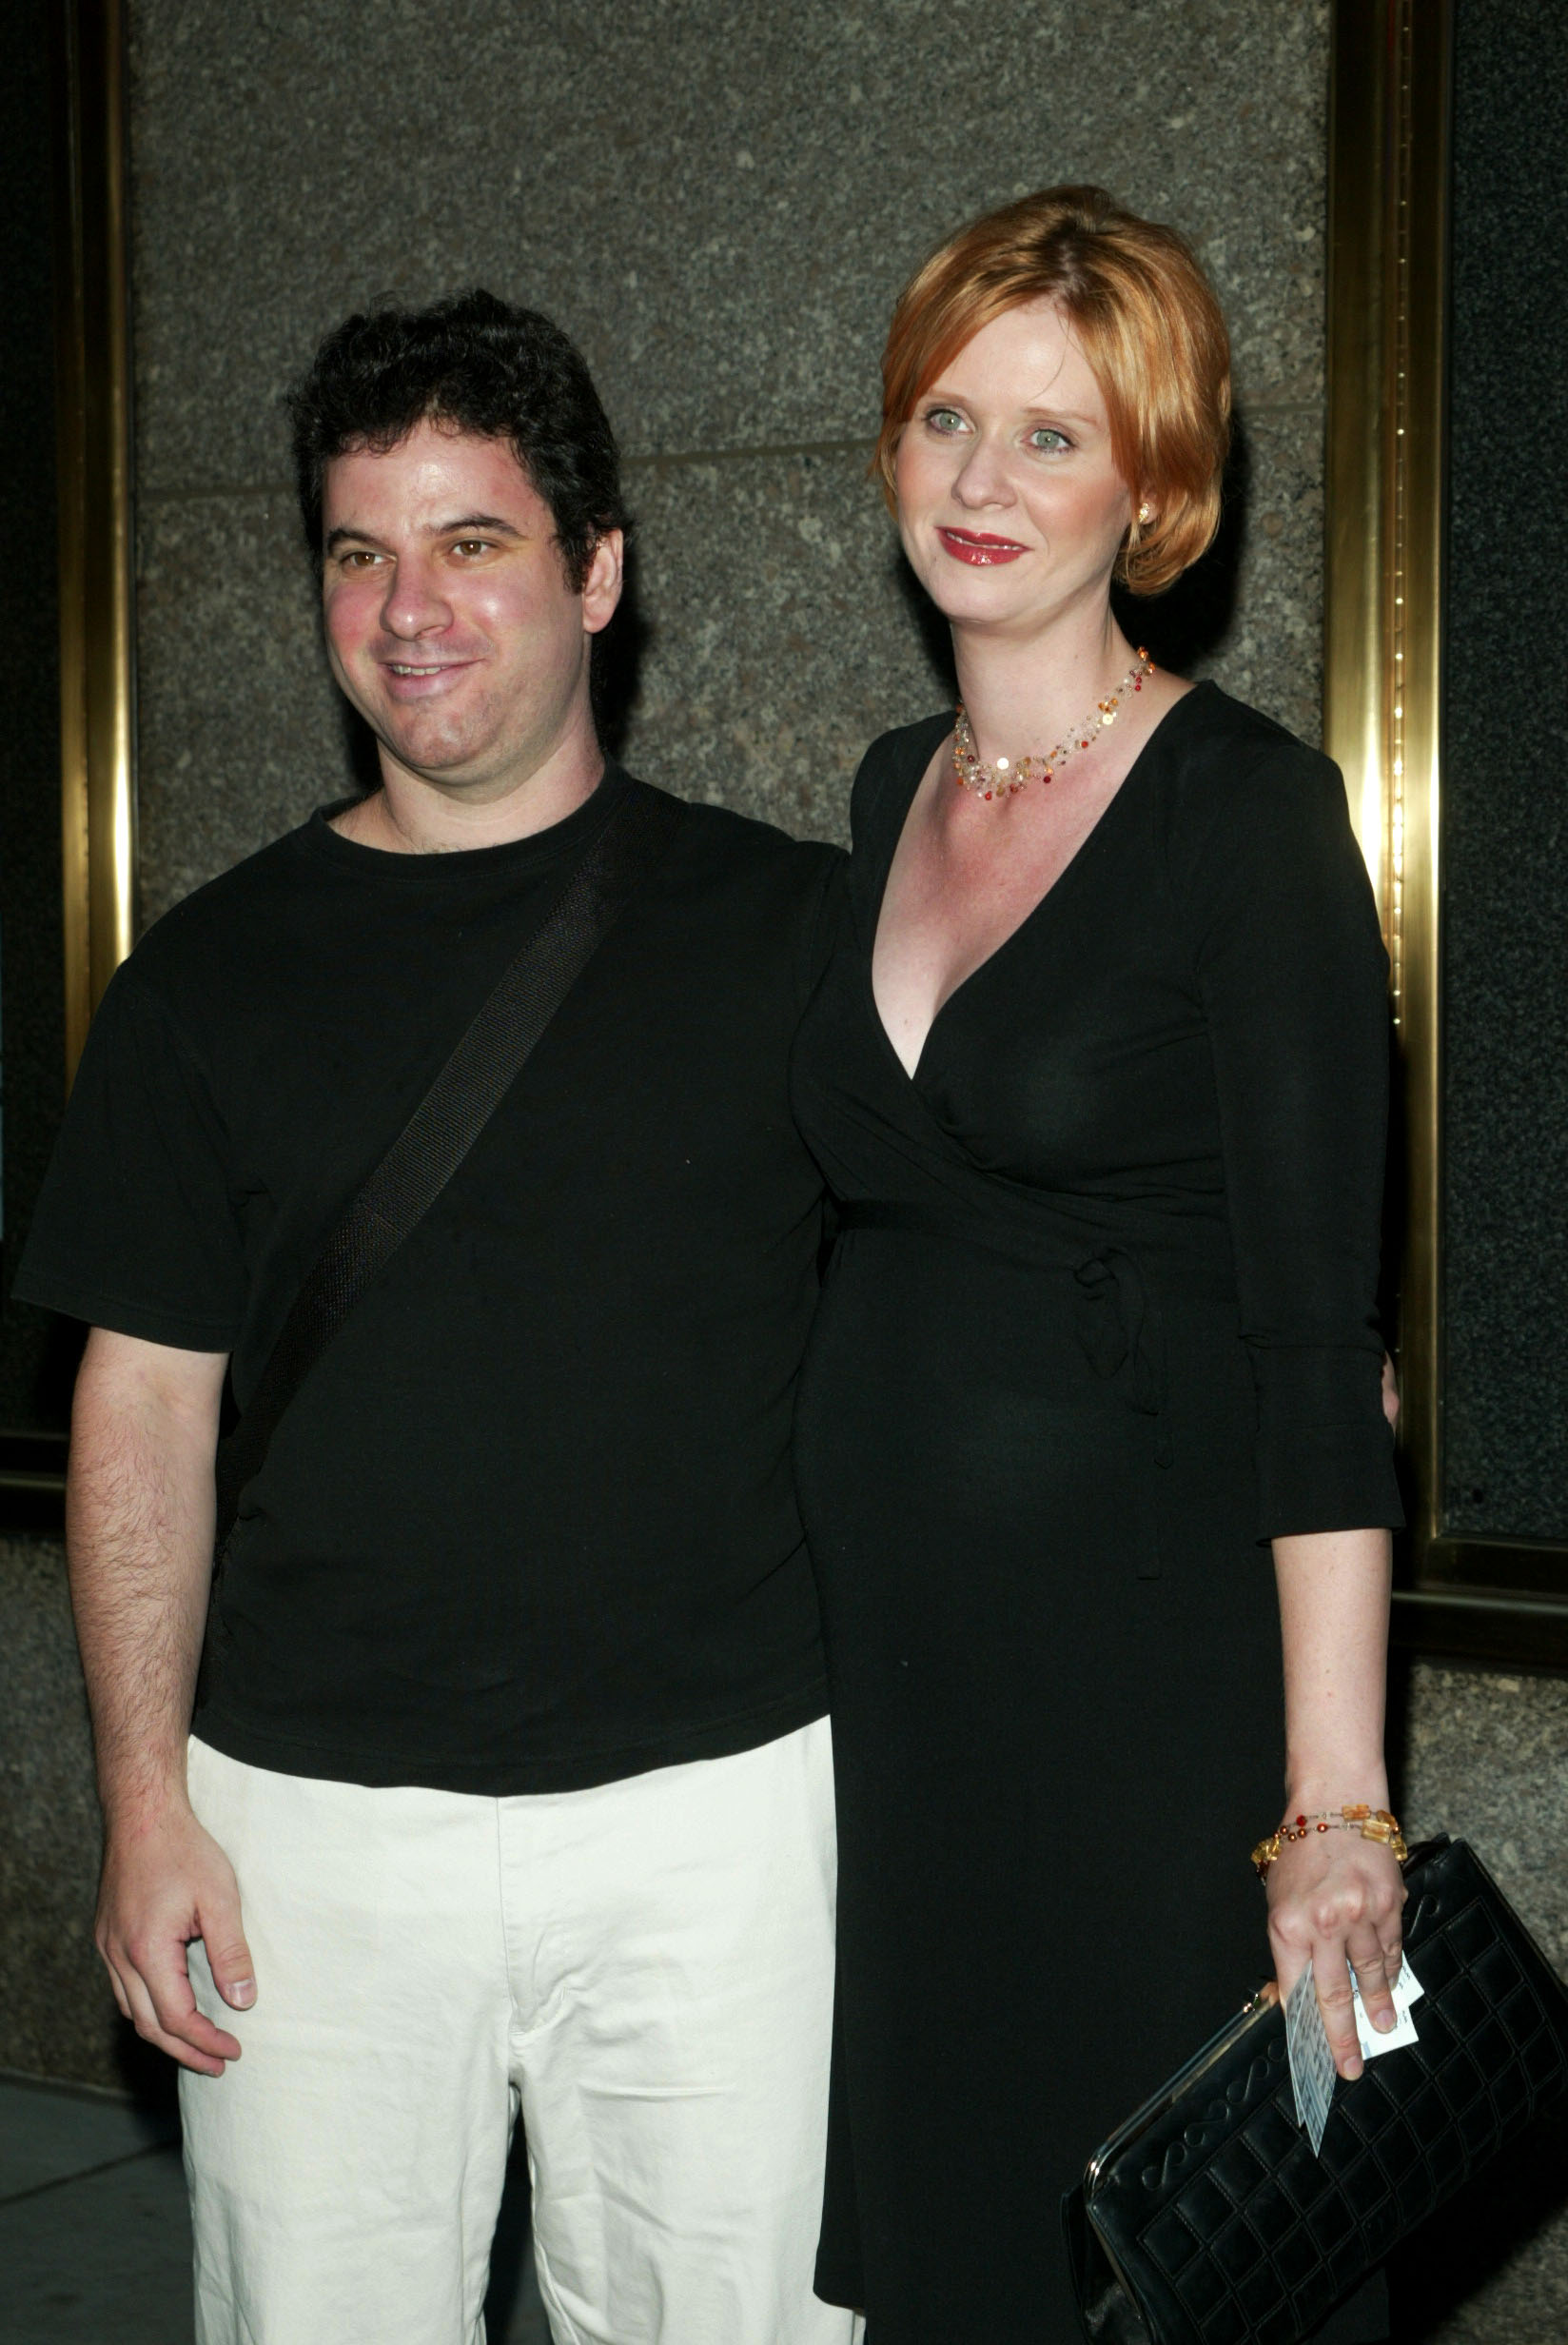 Cynthia Nixon and Danny Mozes arrive at the world premiere of the fourth season of HBO's "The Sopranos" at Radio City Music Hall on September 5, 2002, in New York City. | Source: Getty Images